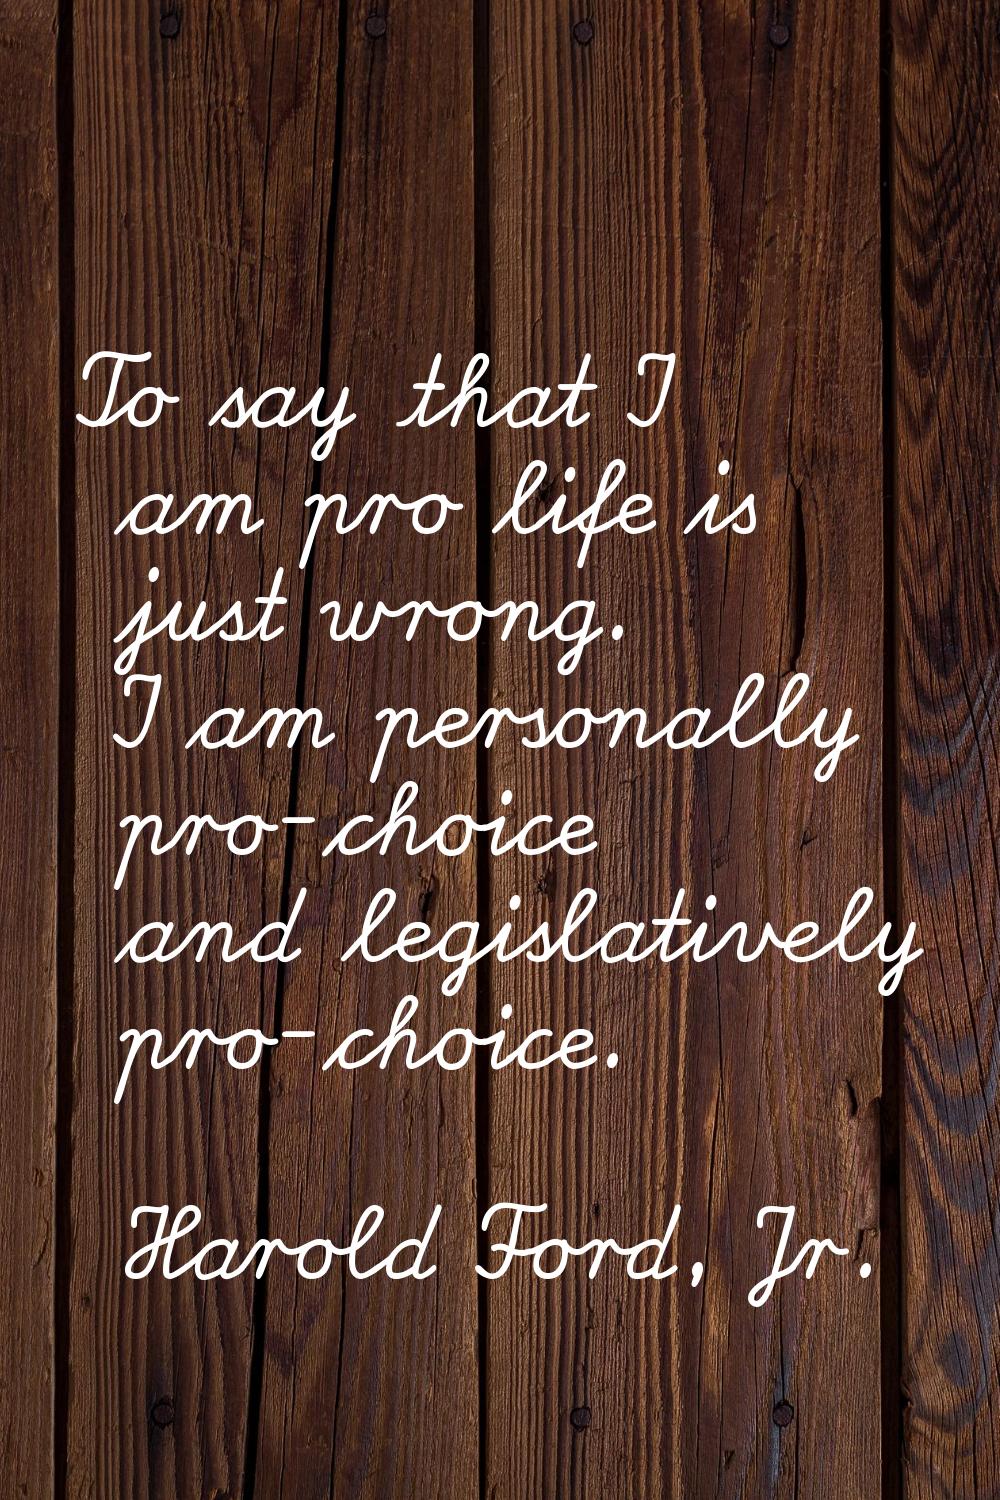 To say that I am pro life is just wrong. I am personally pro-choice and legislatively pro-choice.